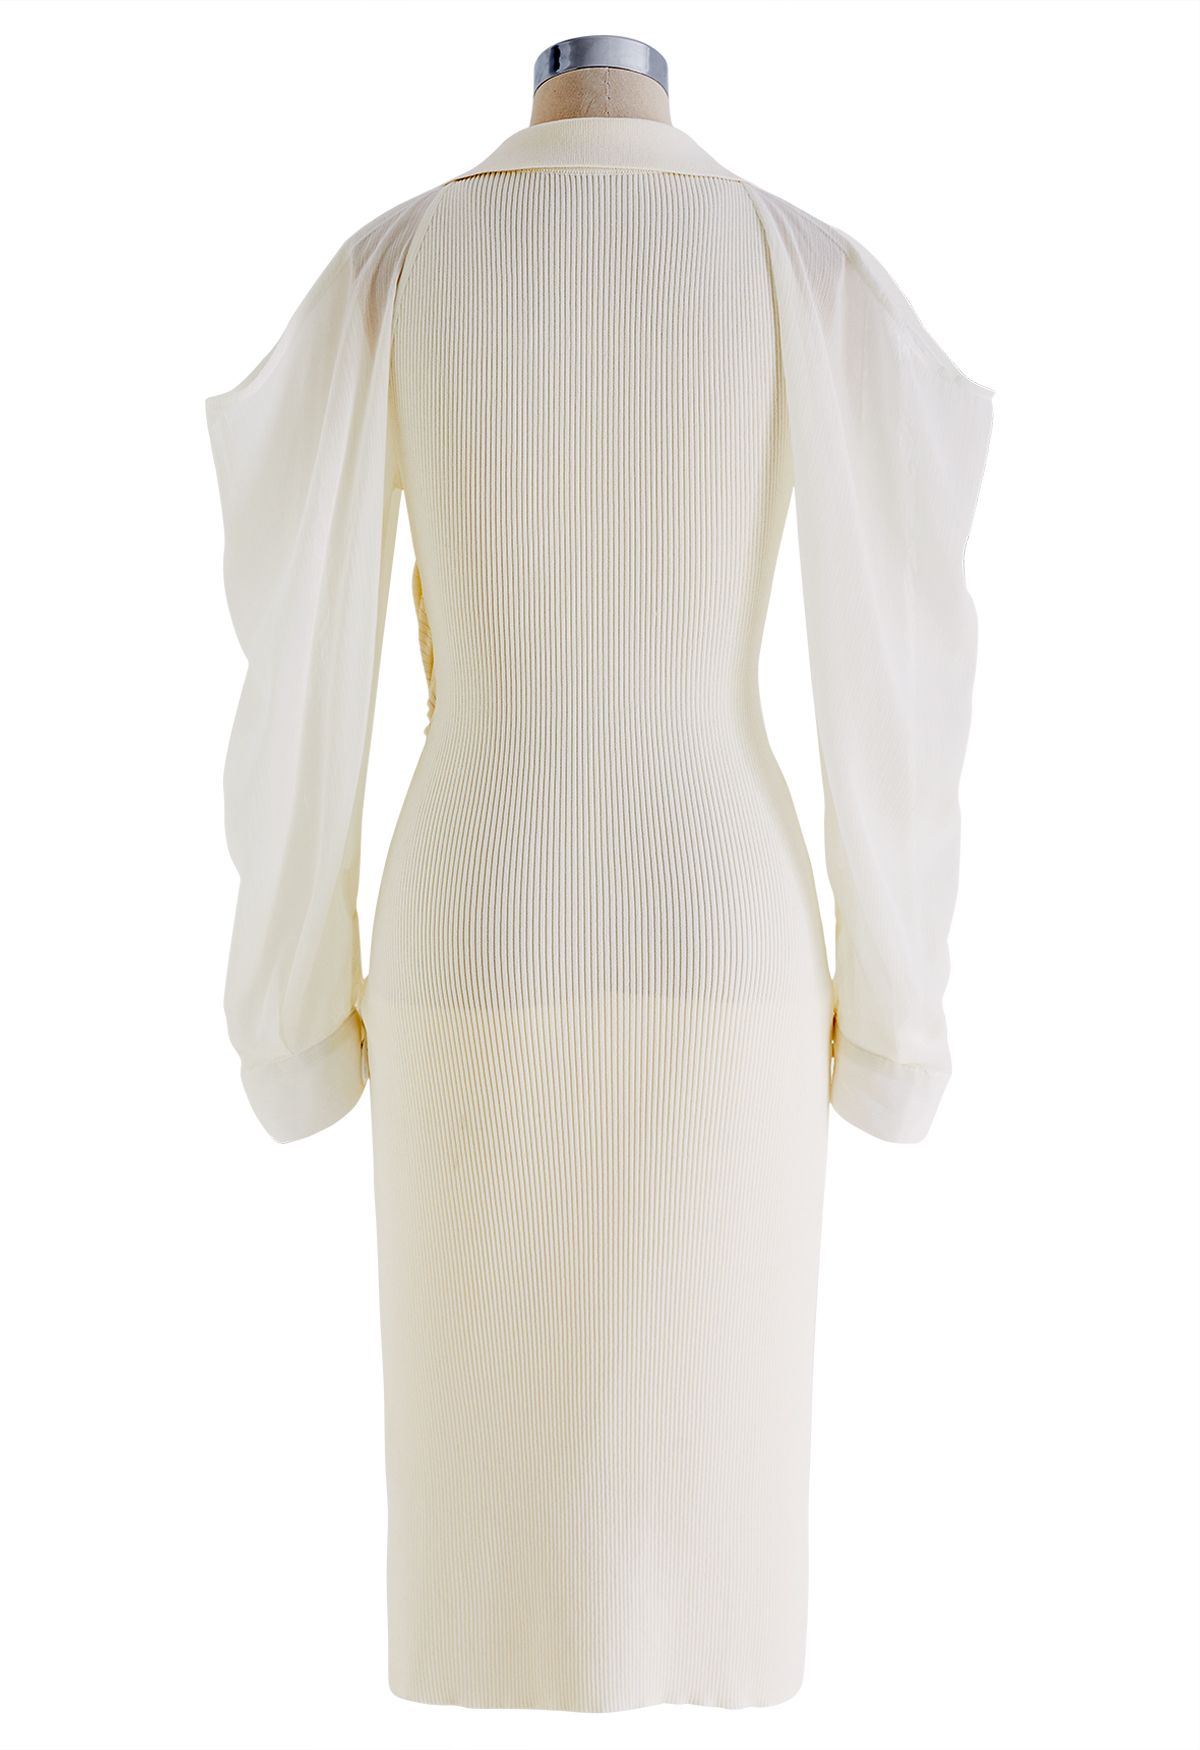 Sheer Sleeve Cold-Shoulder Bodycon Knit Dress in Cream